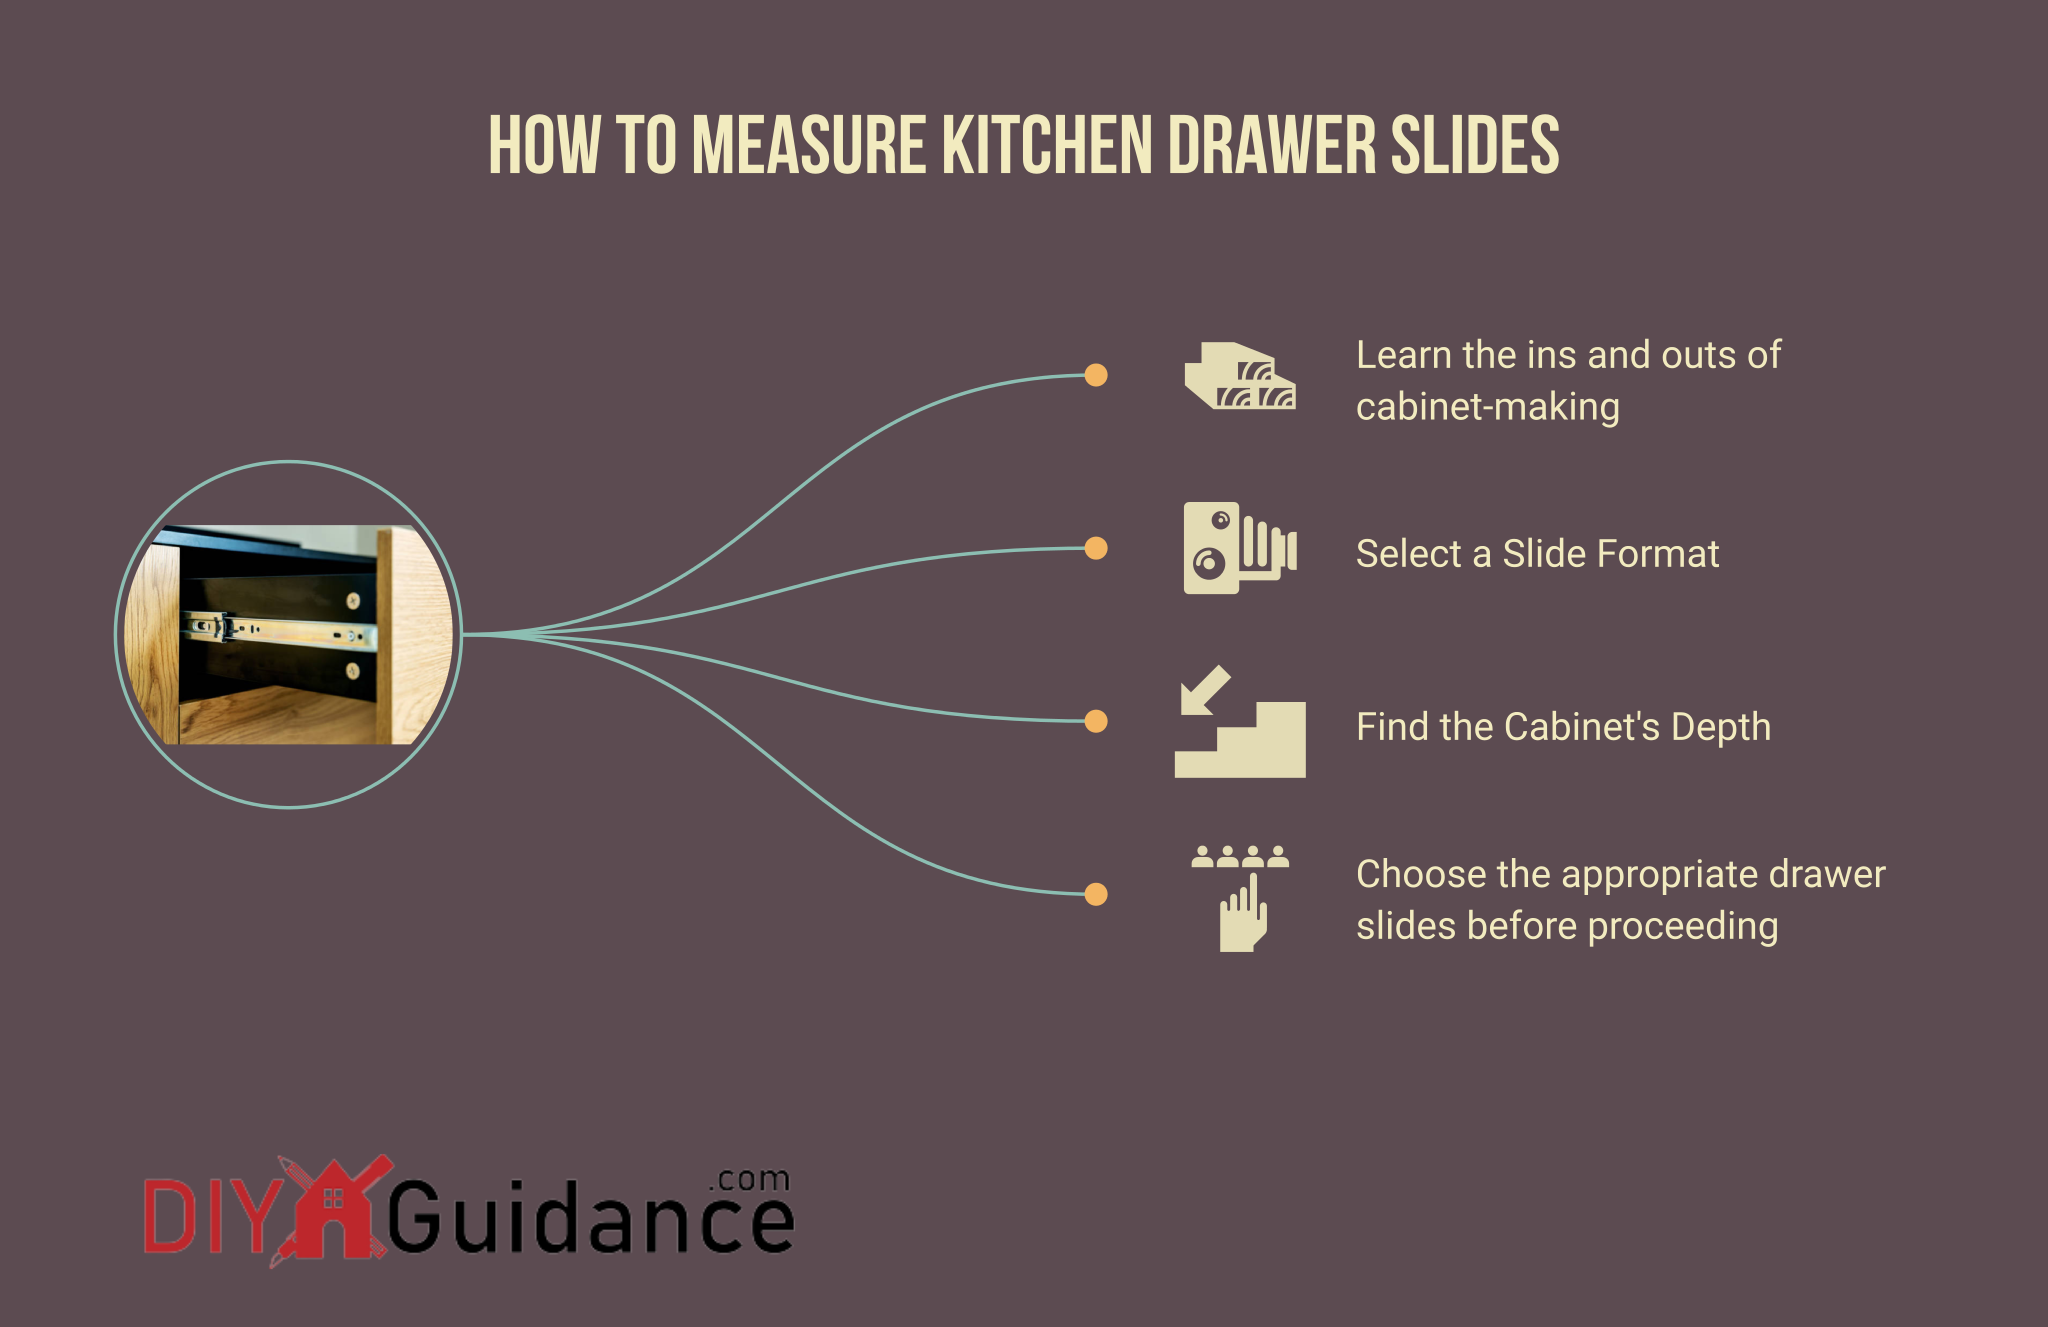 How to Measure Kitchen Drawer Slides